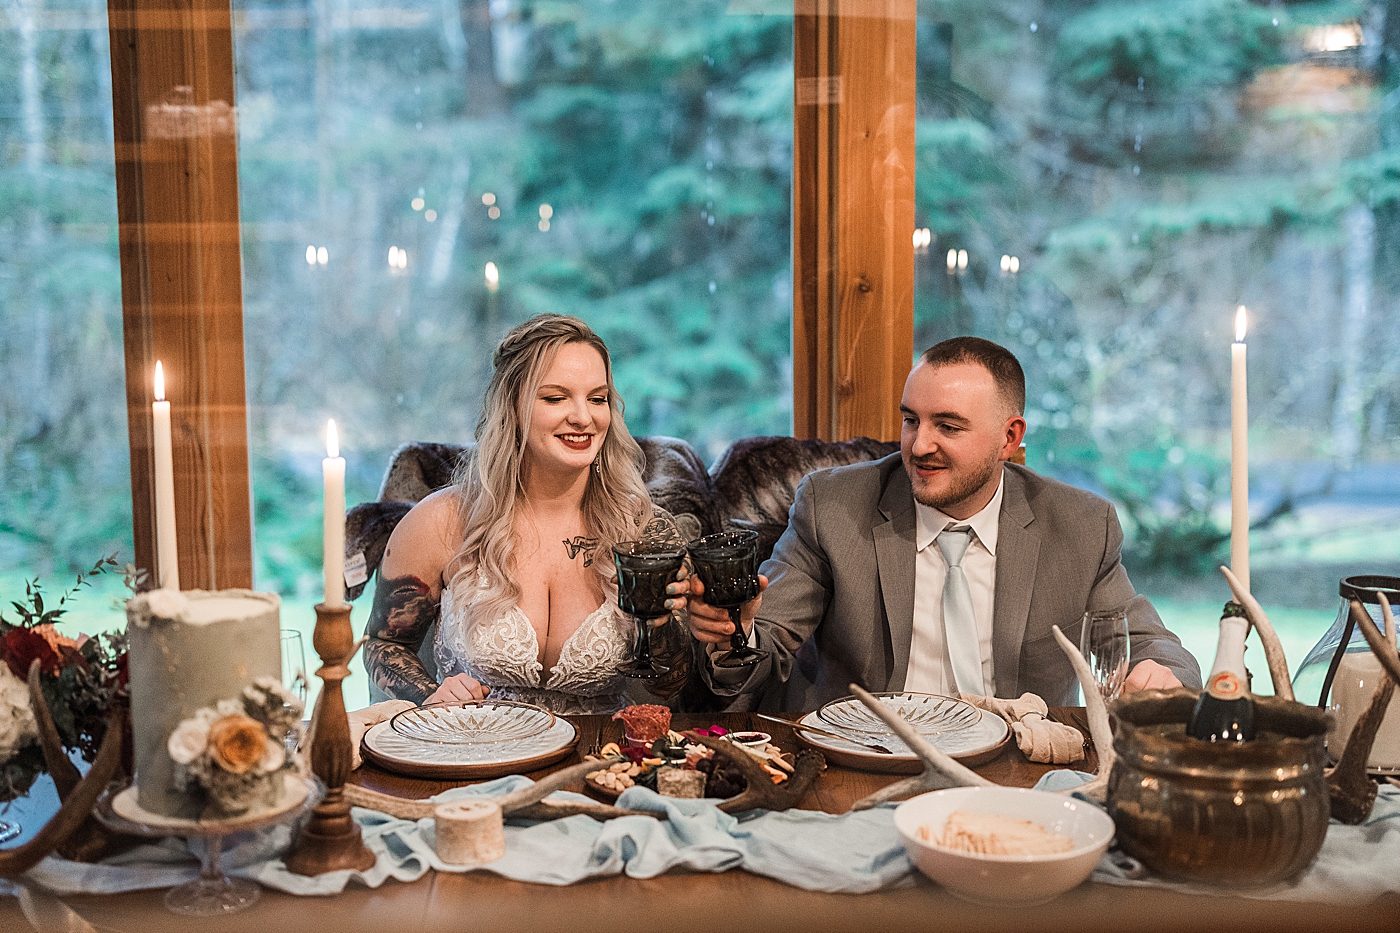 Newly married couple toasts during reception. Photo by Megan Montalvo Photography.